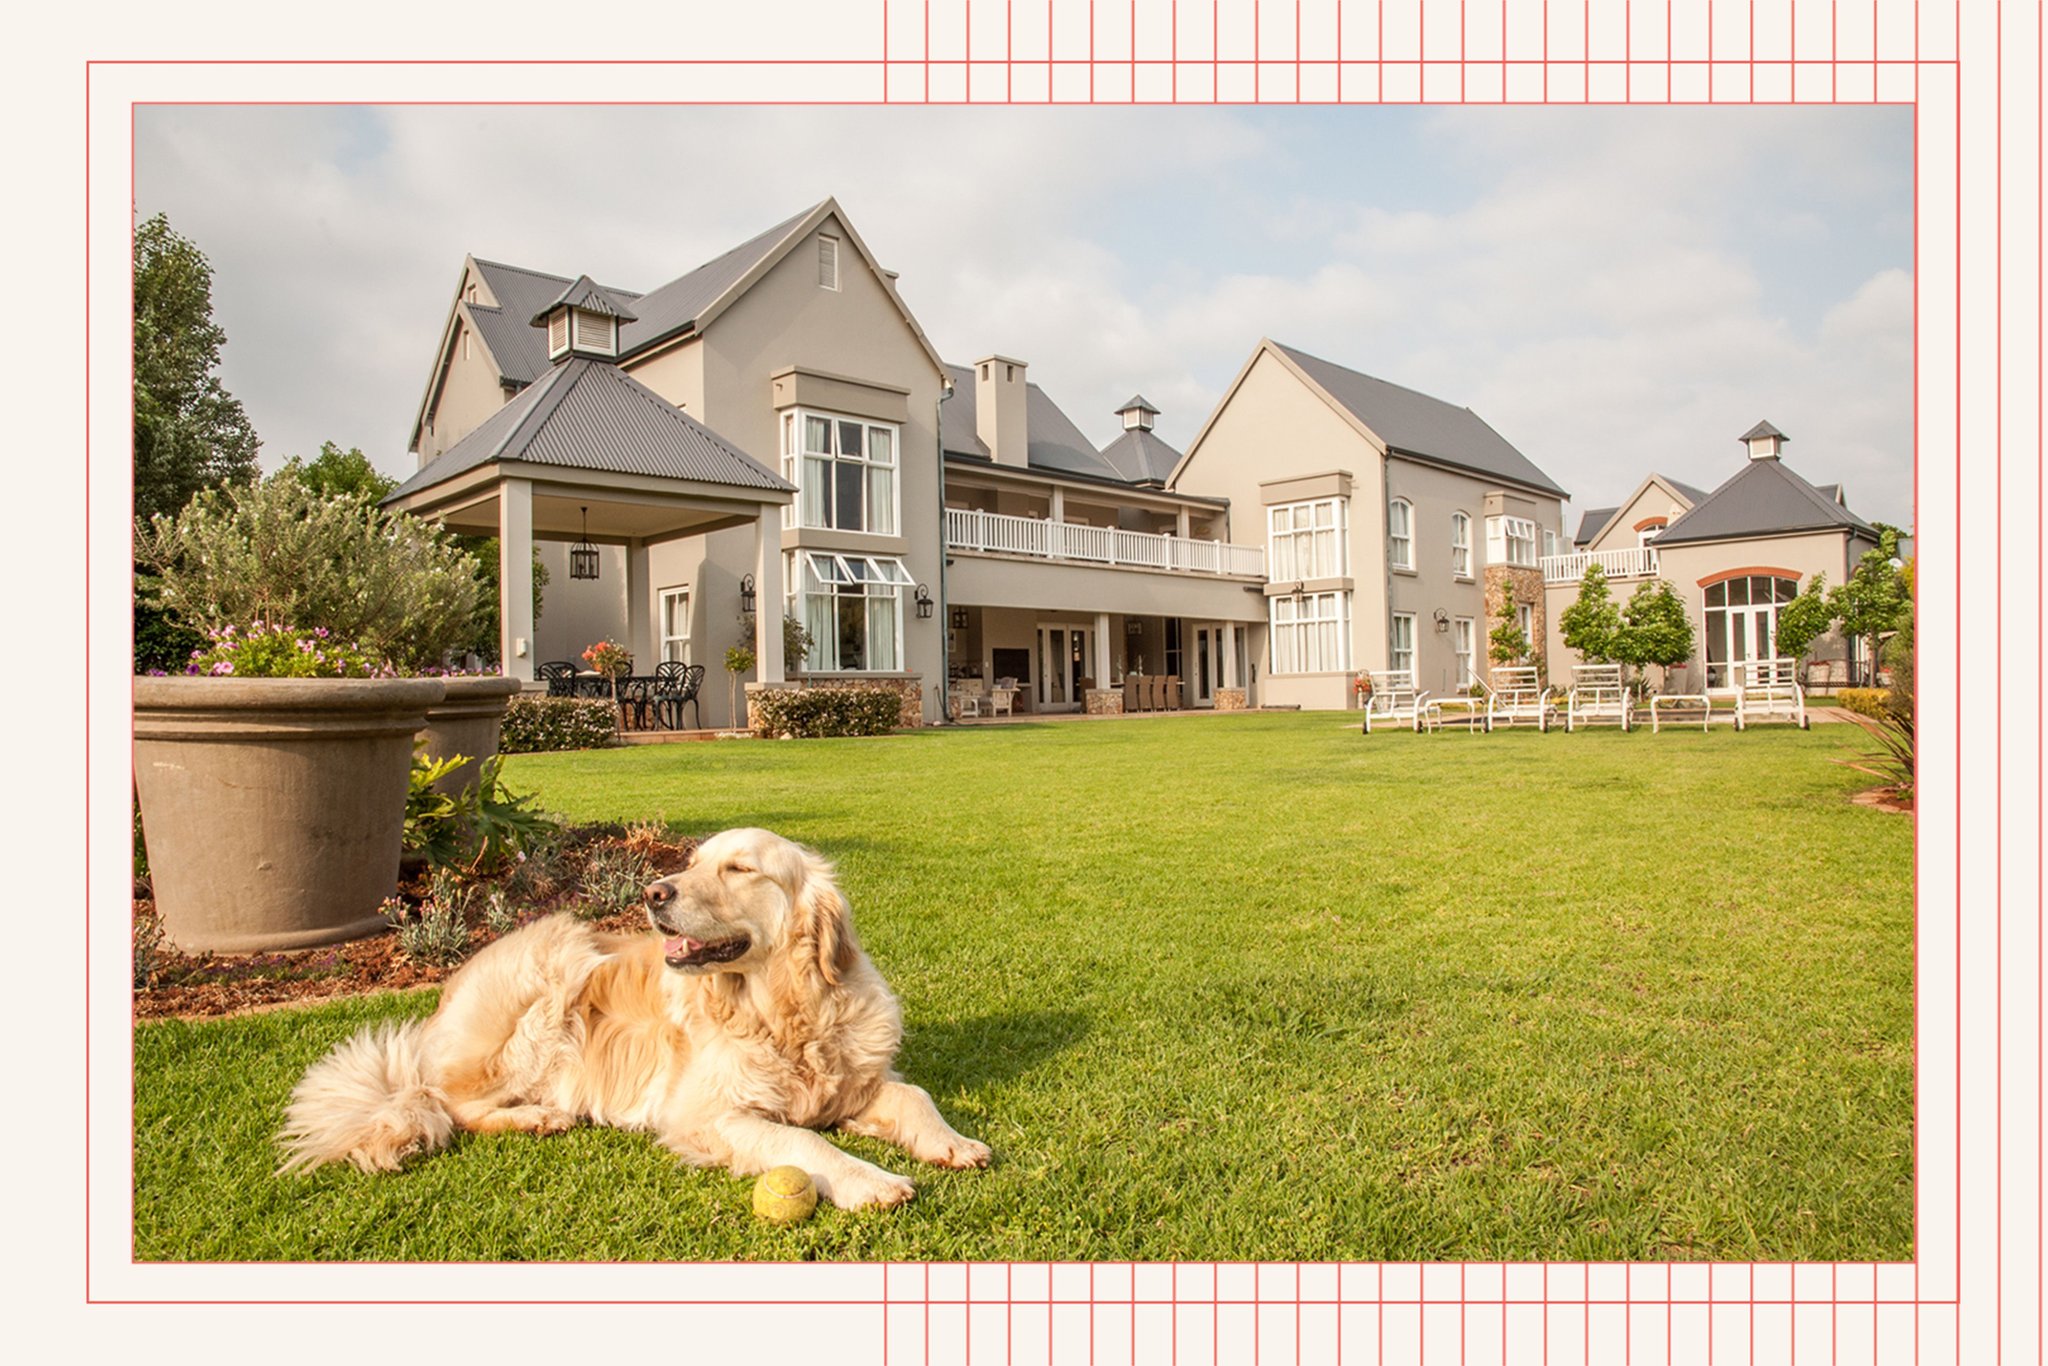 A Majority of People Prioritize Their Pets’ Needs When Buying Their Dream Home